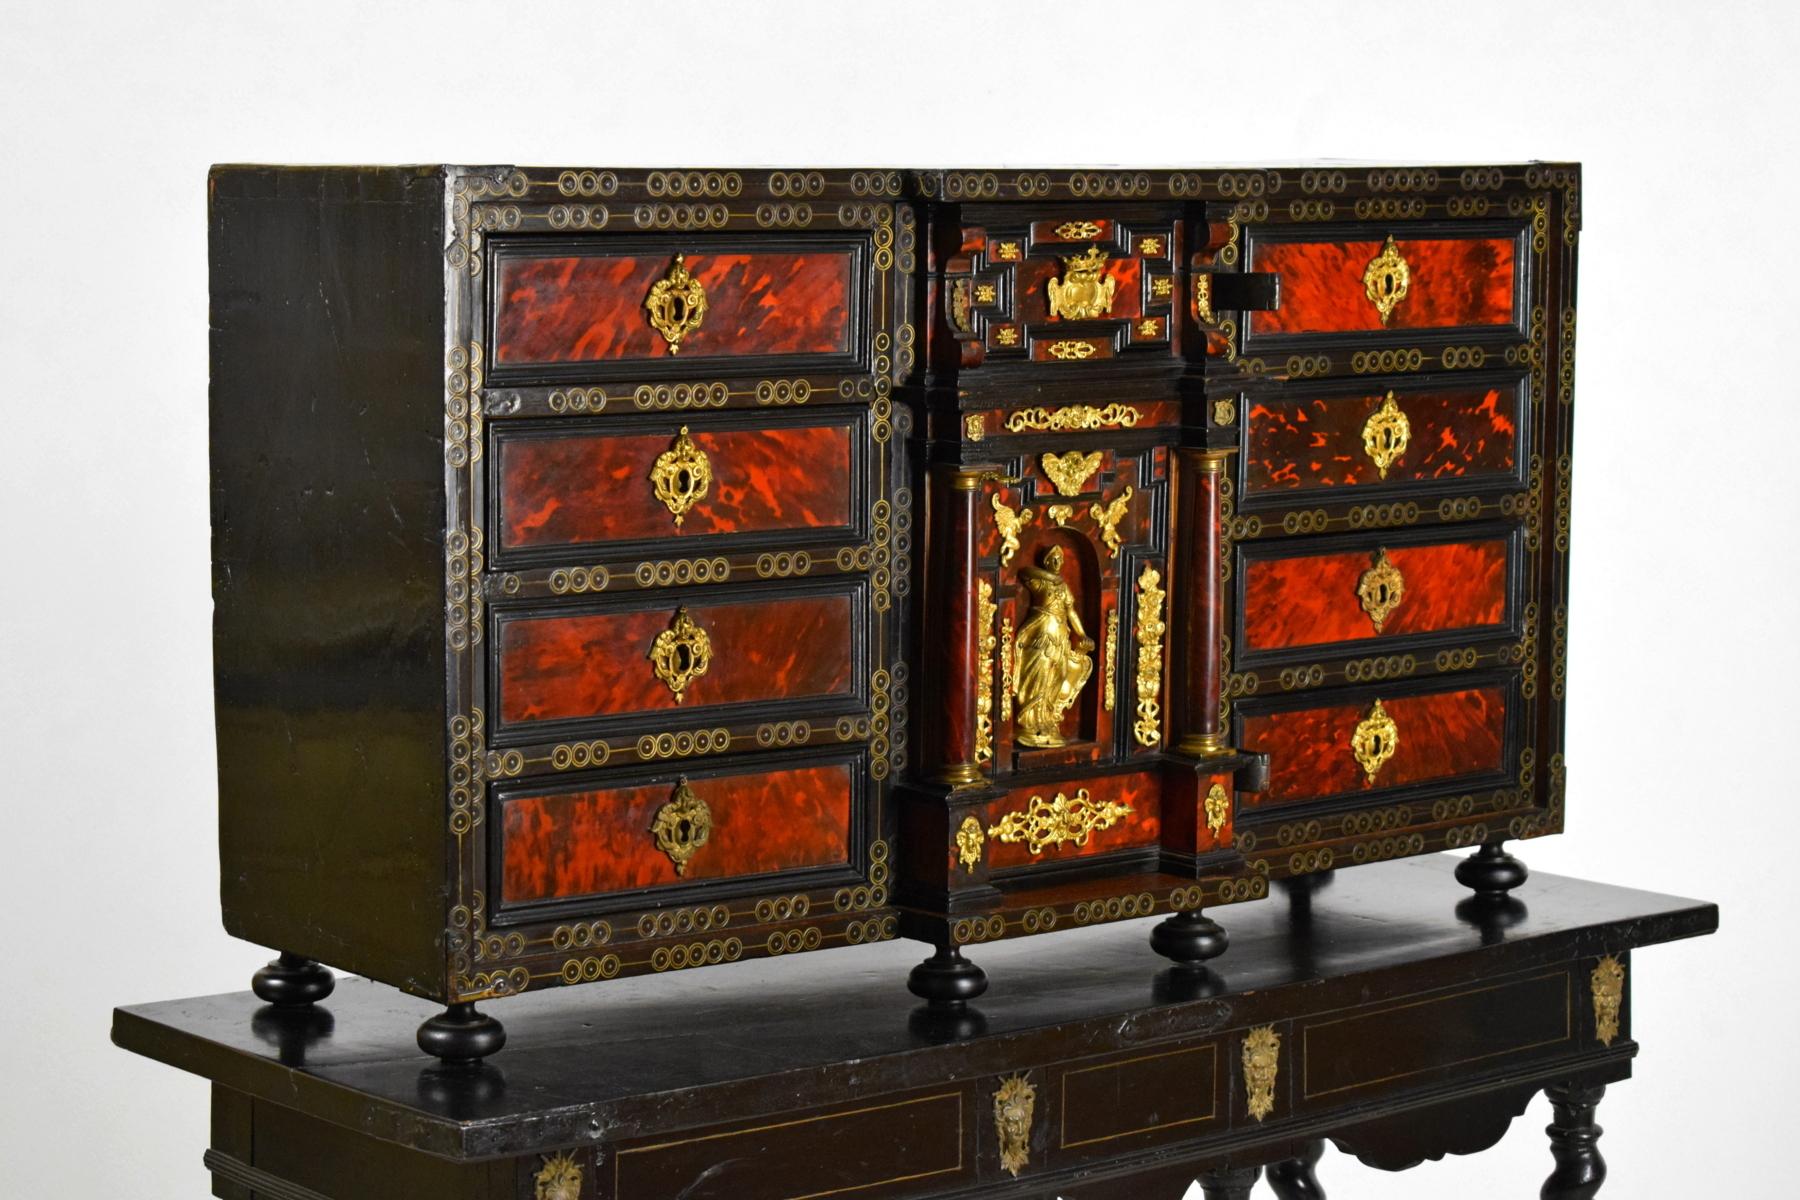 18th century, Louis XIV wood apothecary cabinet with gilded bronze
Measures with base H 145 x 127 x 45 cm; only cabinet H 62 x W 114 x D 37 cm

This particular coin cabinet was made in the early 18th century in the north of Europe in dark wood,